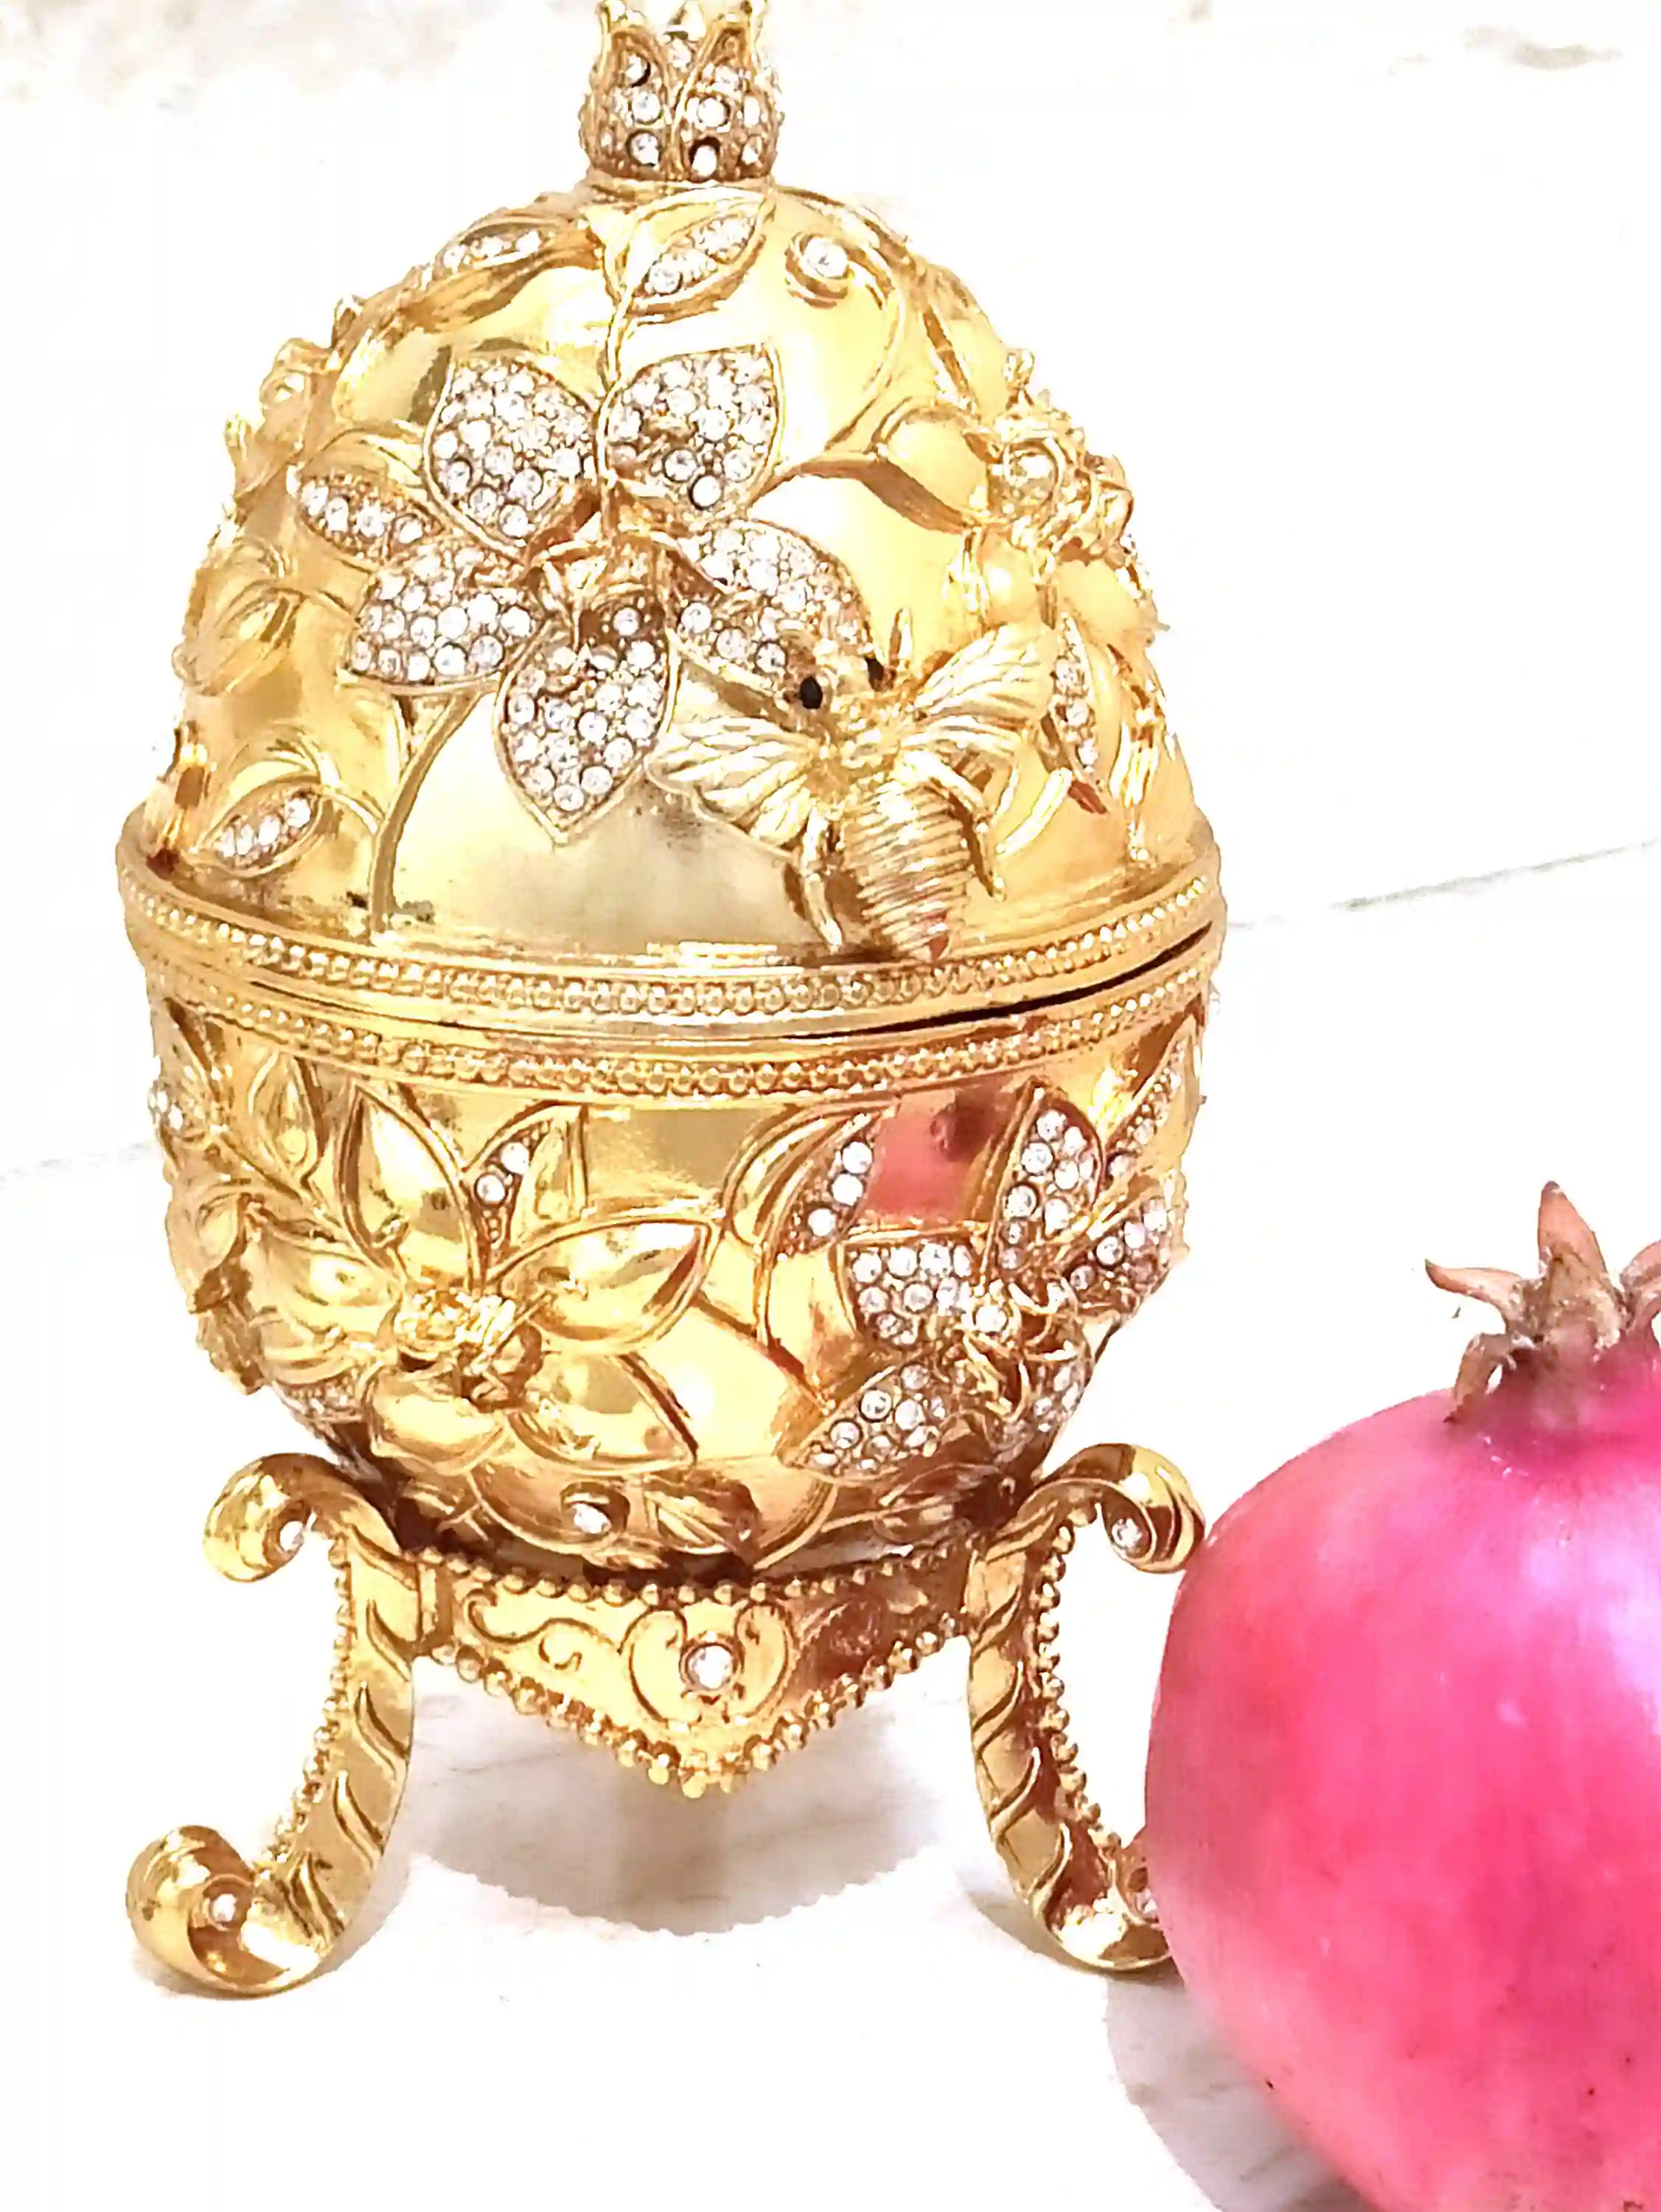 24k GOLD Faberge Collectors Egg Pomegranate Jewelry box Pomagranet GOOD Luck Gift 10ct Diamond HANDMADE Trinket Boxes House Warming Ornament 